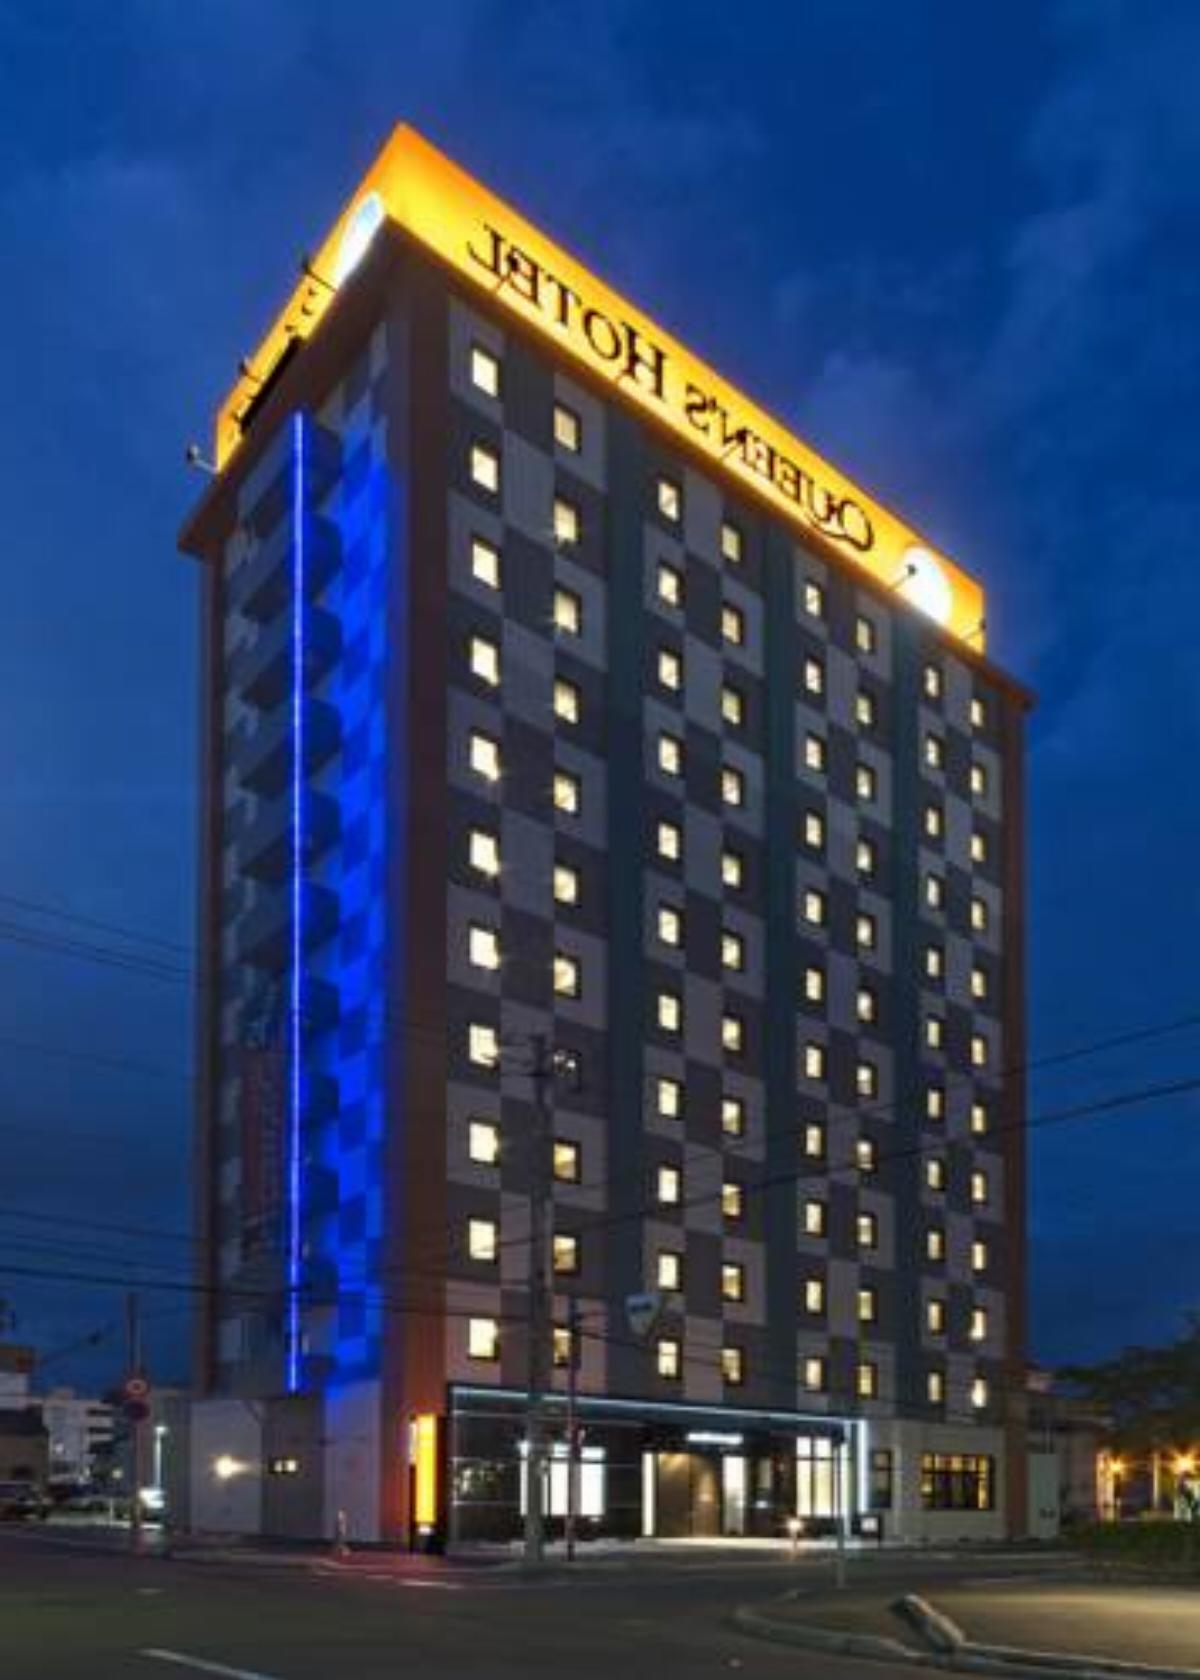 Queens Hotel Chitose Hotel Chitose Japan